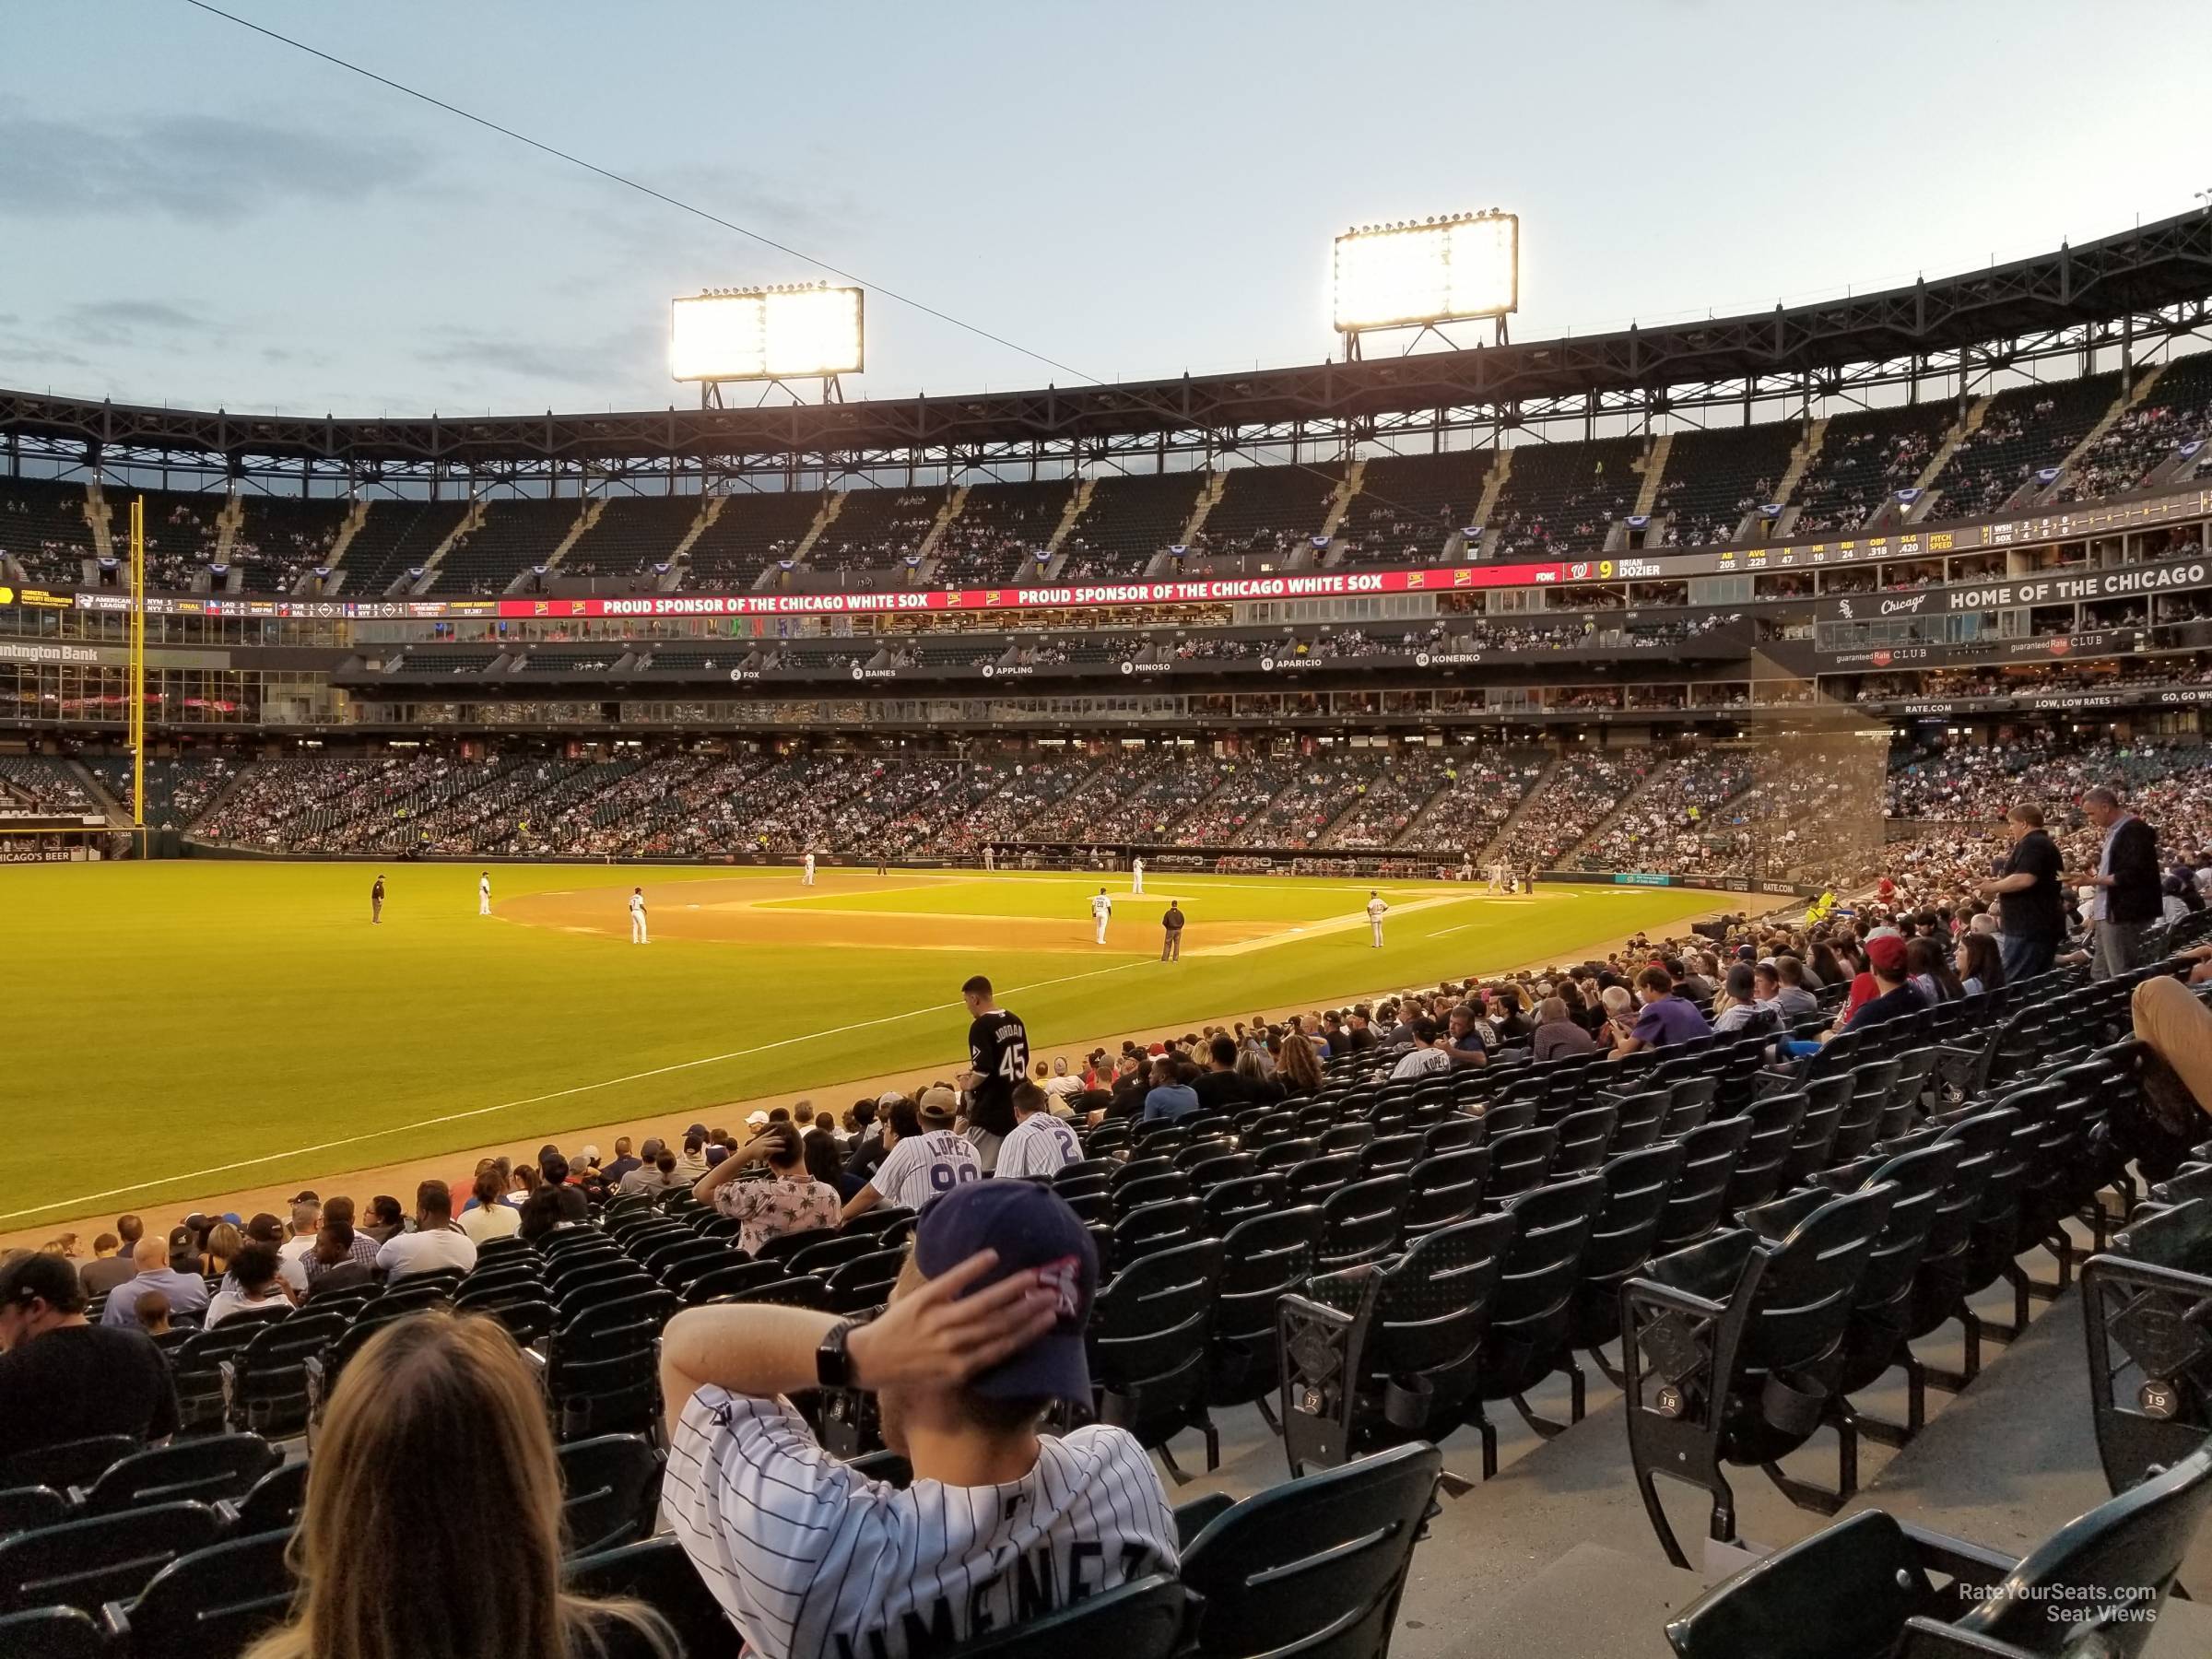 section 151, row 20 seat view  - guaranteed rate field